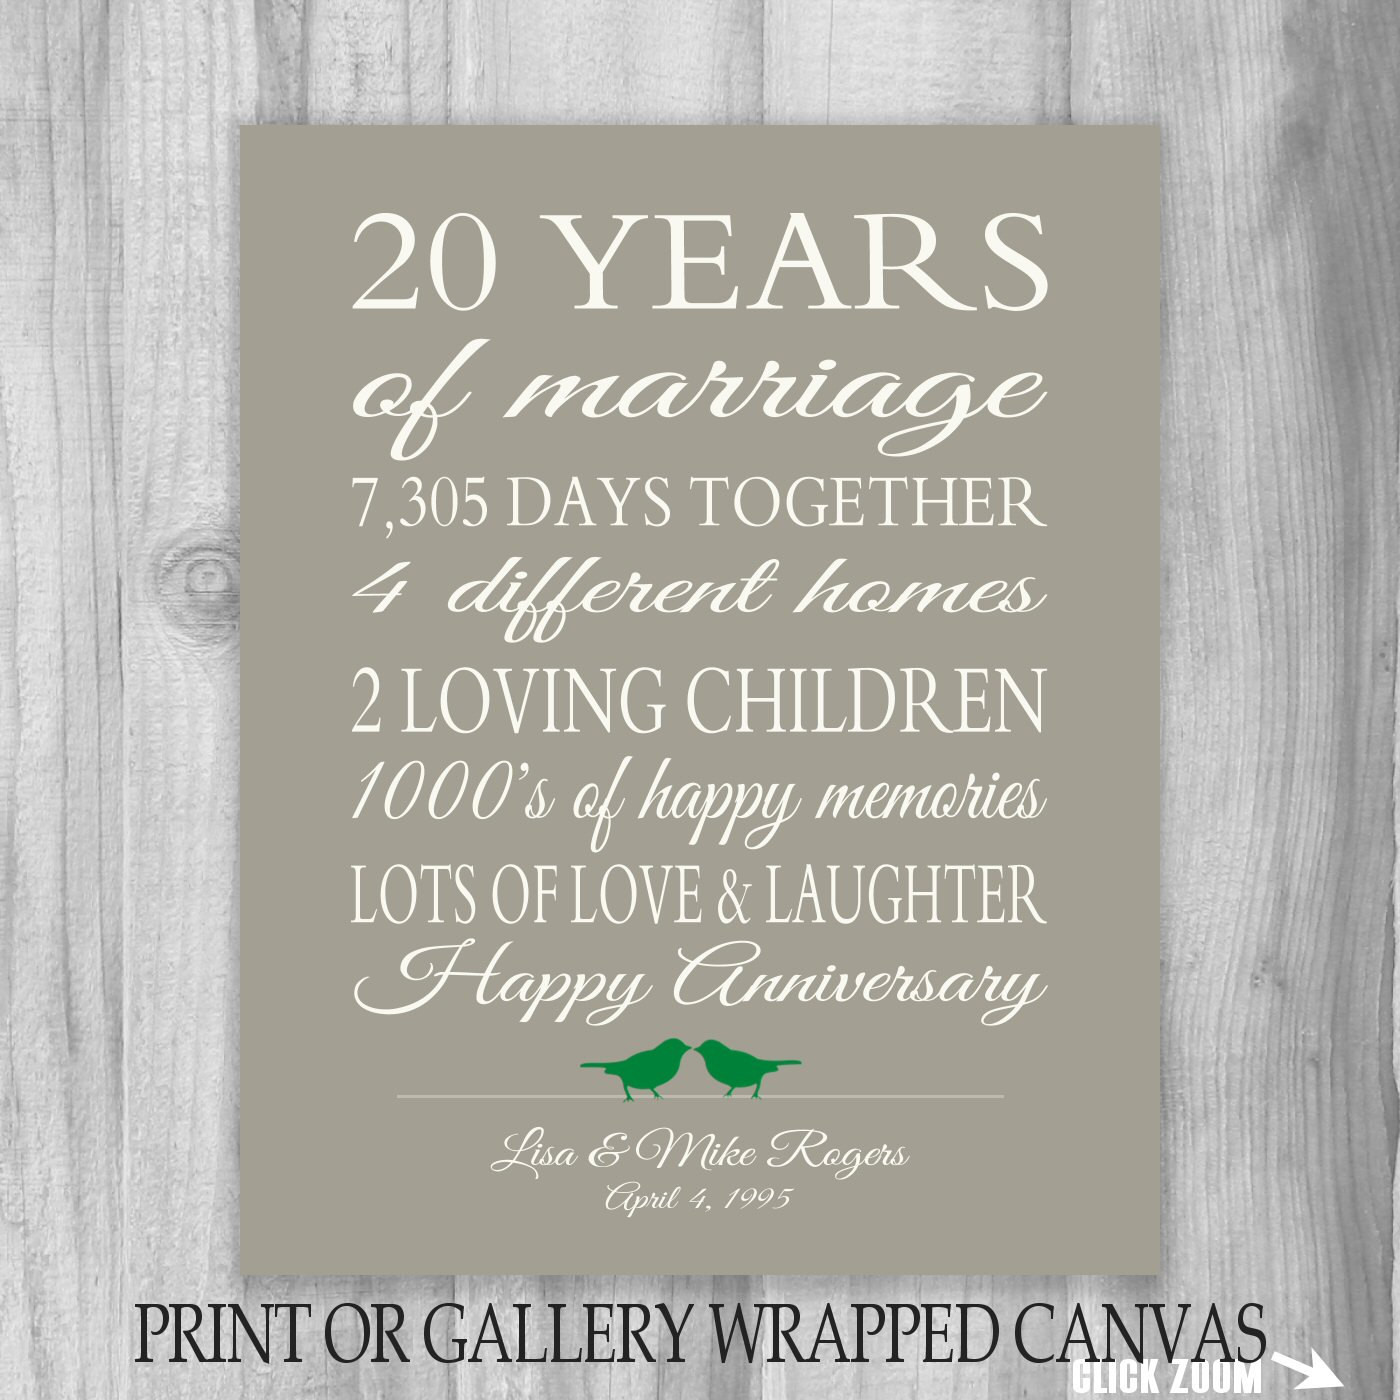 20 Years Of Marriage Quotes
 20 Year Anniversary Gift 20th Anniversary Art by